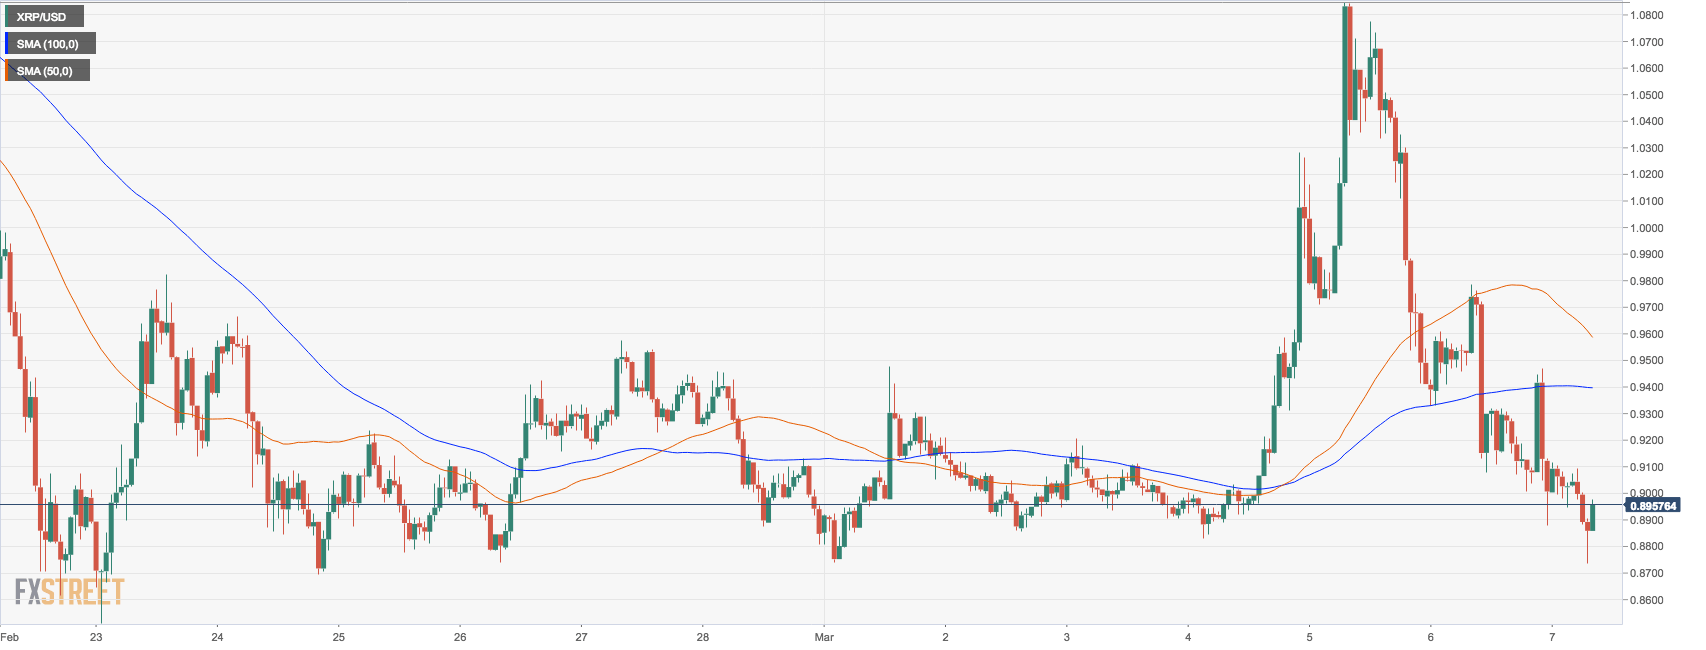 XRP/USD, the hourly chart